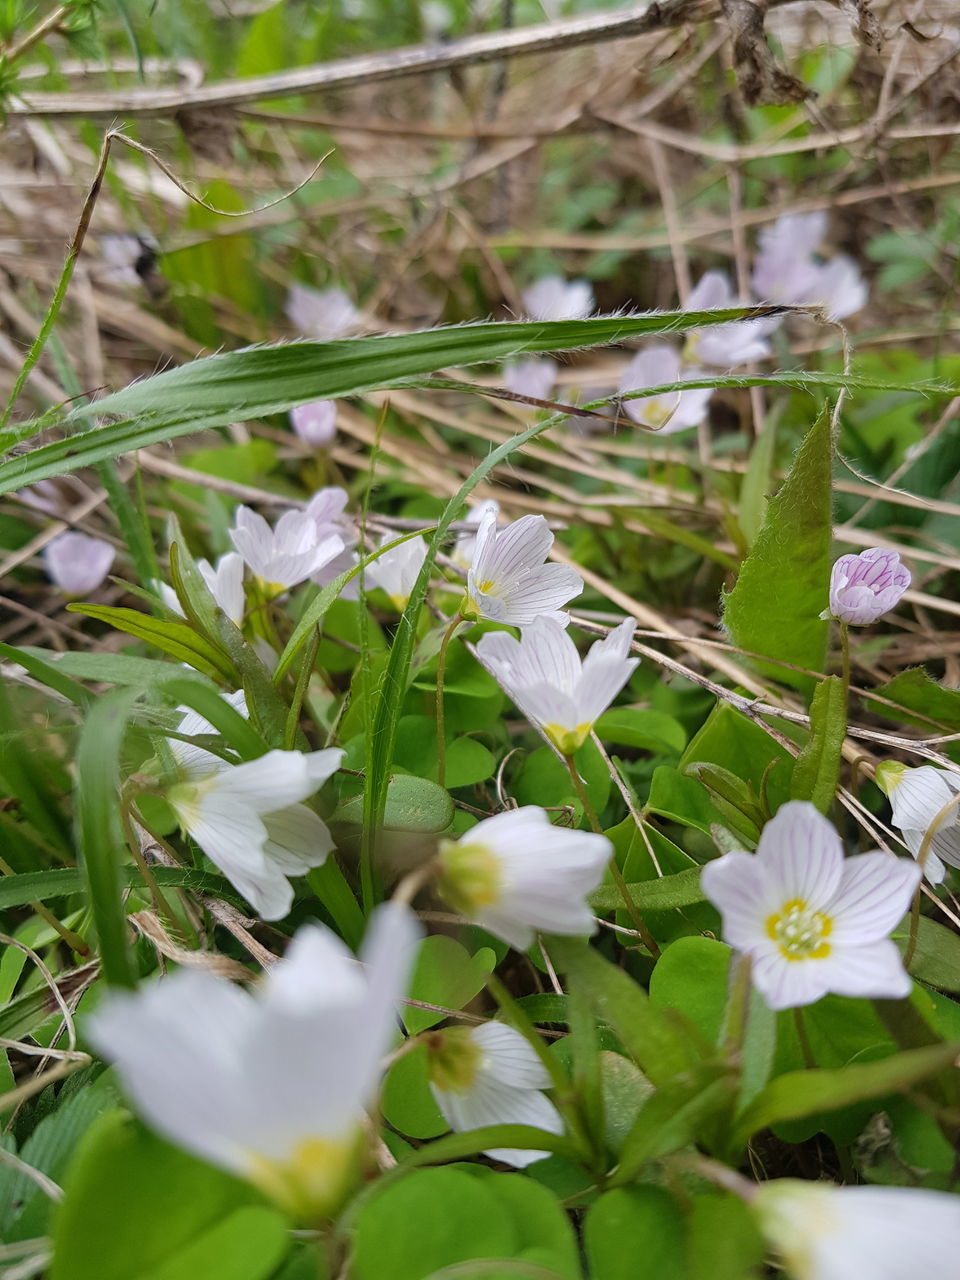 CLOSE-UP OF WHITE FLOWERS ON FIELD